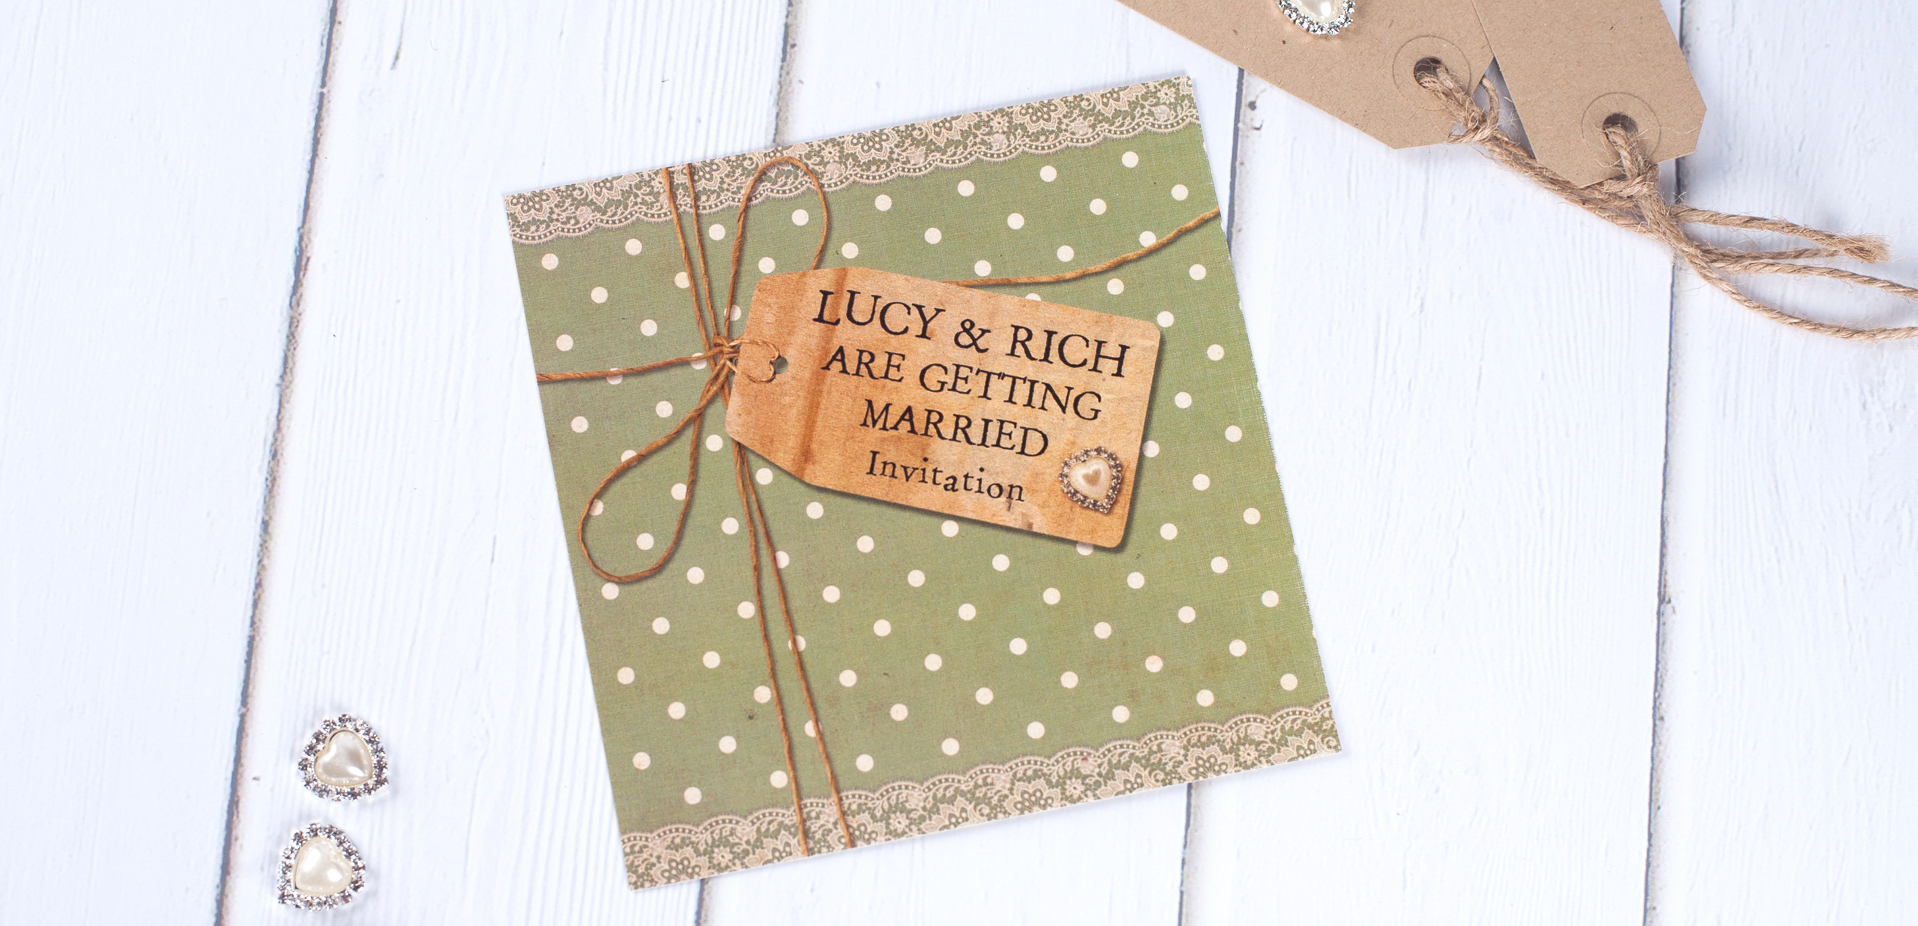 A sage green wedding invite with a vintage style, polka dots, lace, brown luggage tags and lace